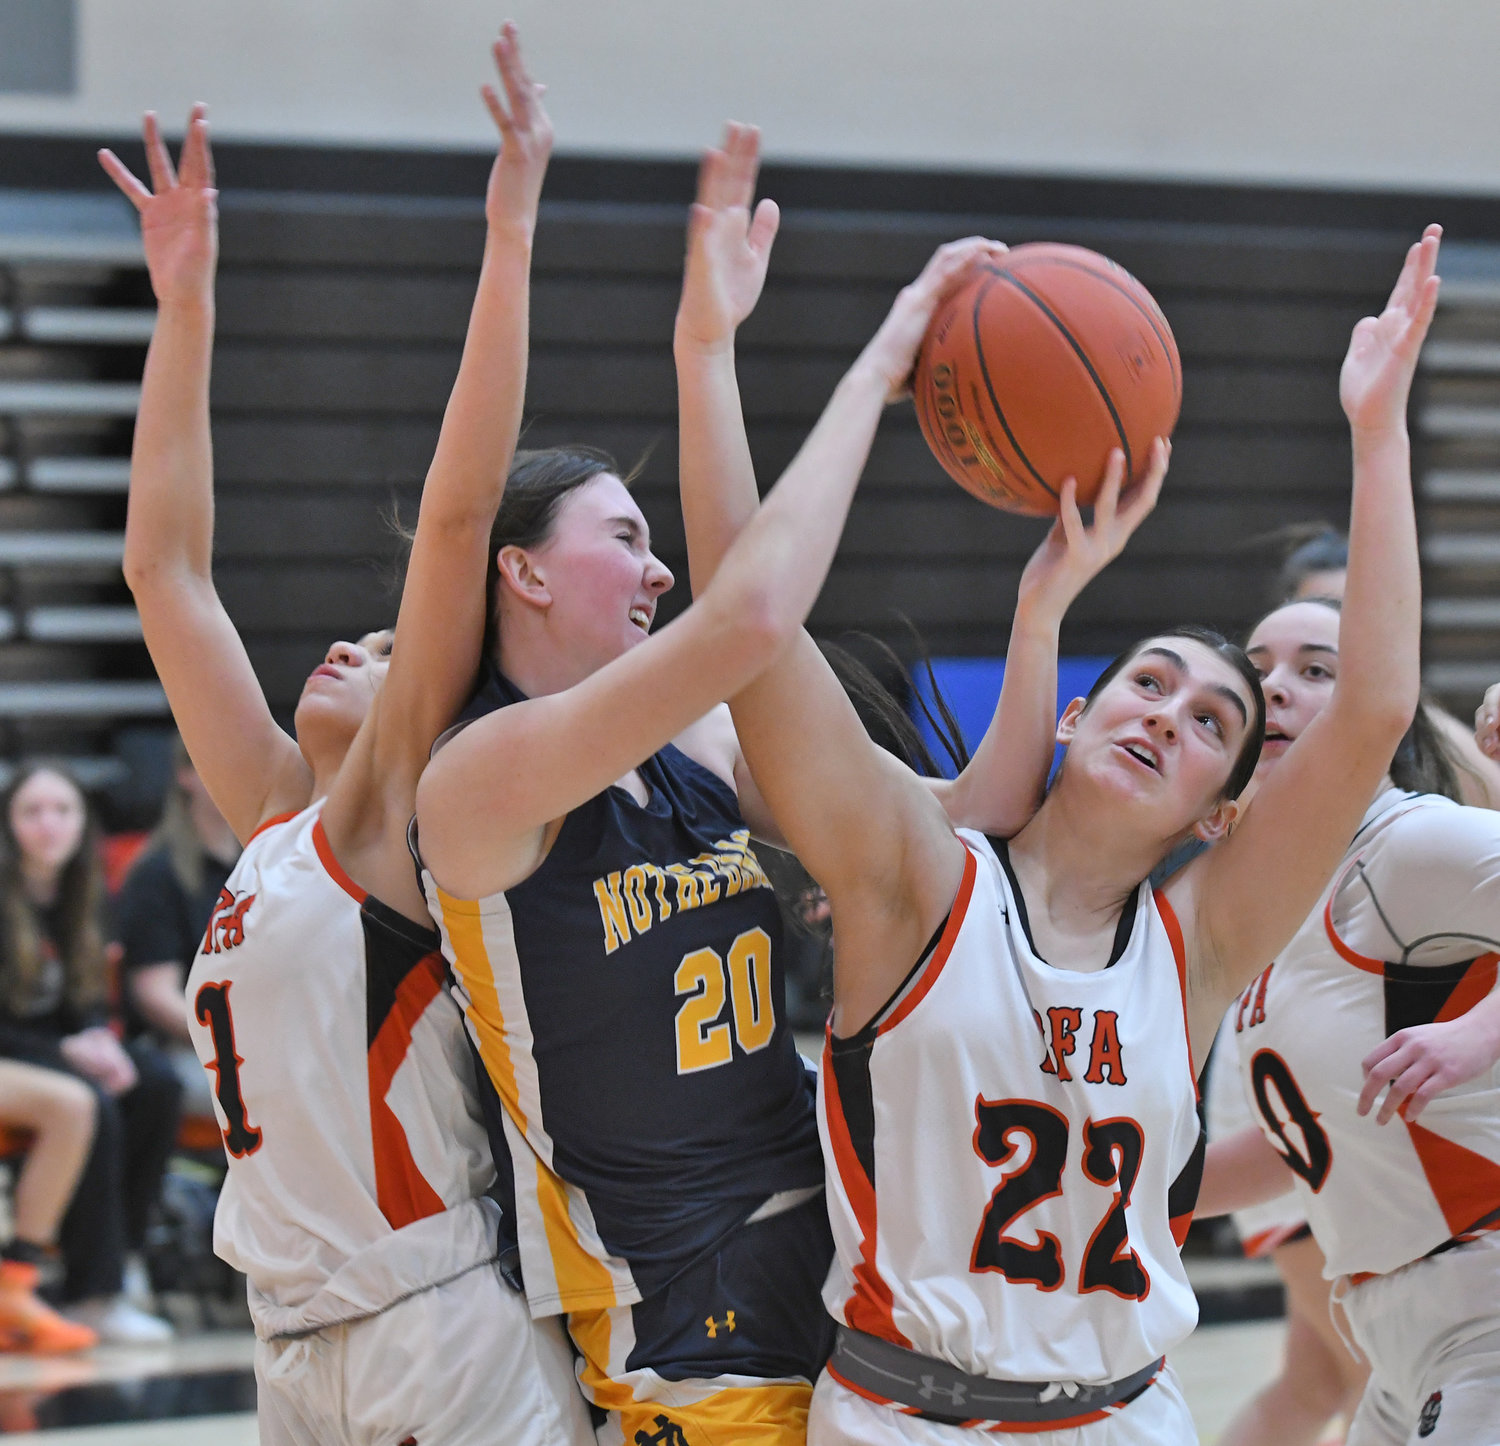 Alysa Jackson, left, and Mia Mirabelli of Rome Free Academy surround Utica-Notre Dame’s Ella Trinkaus in a battle for the ball Tuesday at RFA. Trinkaus led the Jugglers with 24 points but RFA won 62-54. Jackson and Mirabelli scored 10 each.